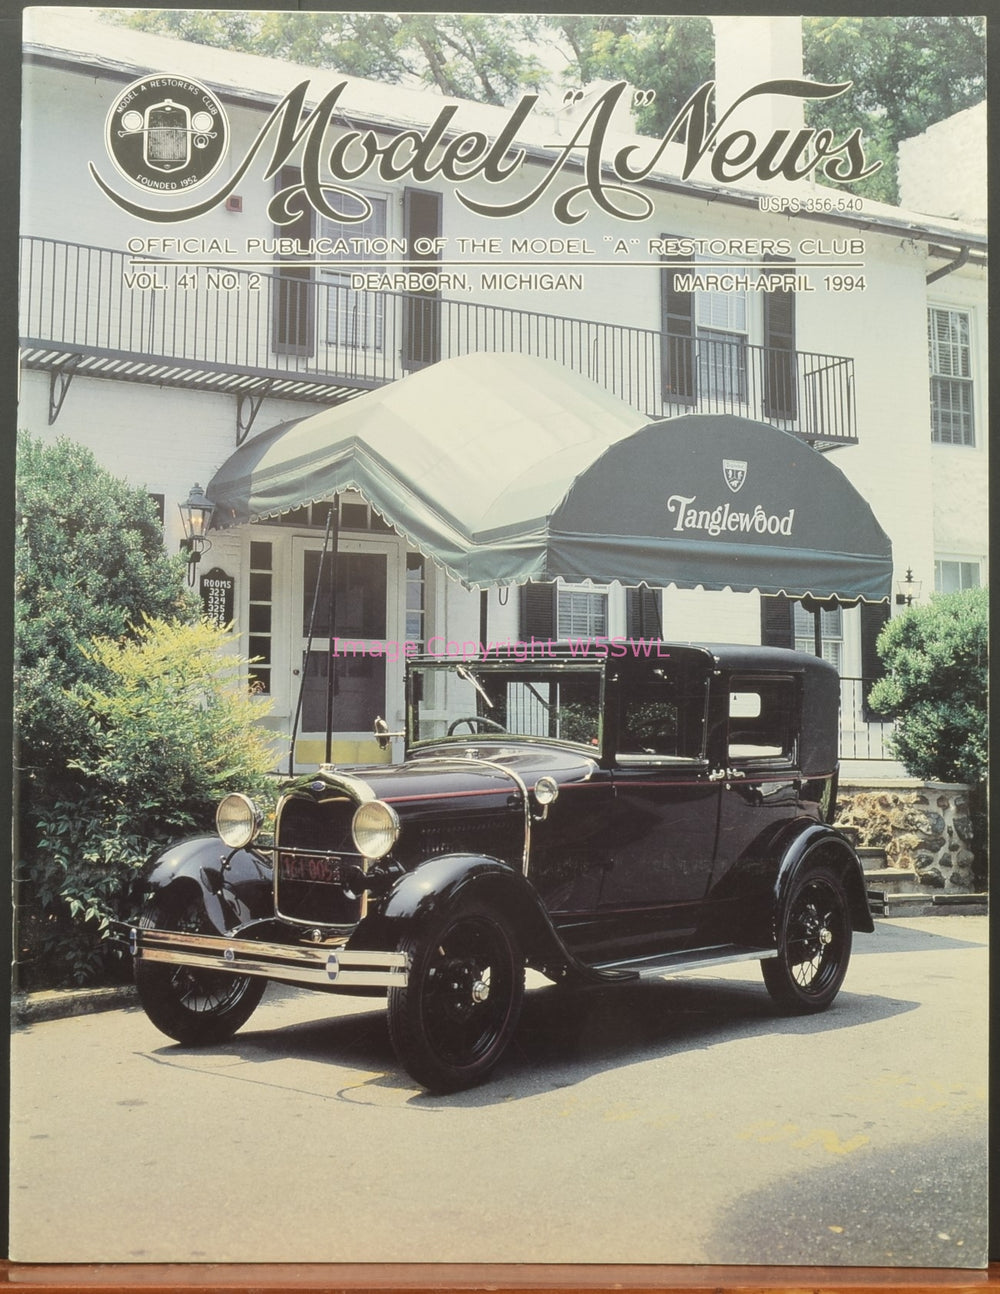 Model A News Restorers Club Vol 41 No 2 March-April 1994 - Dave's Hobby Shop by W5SWL